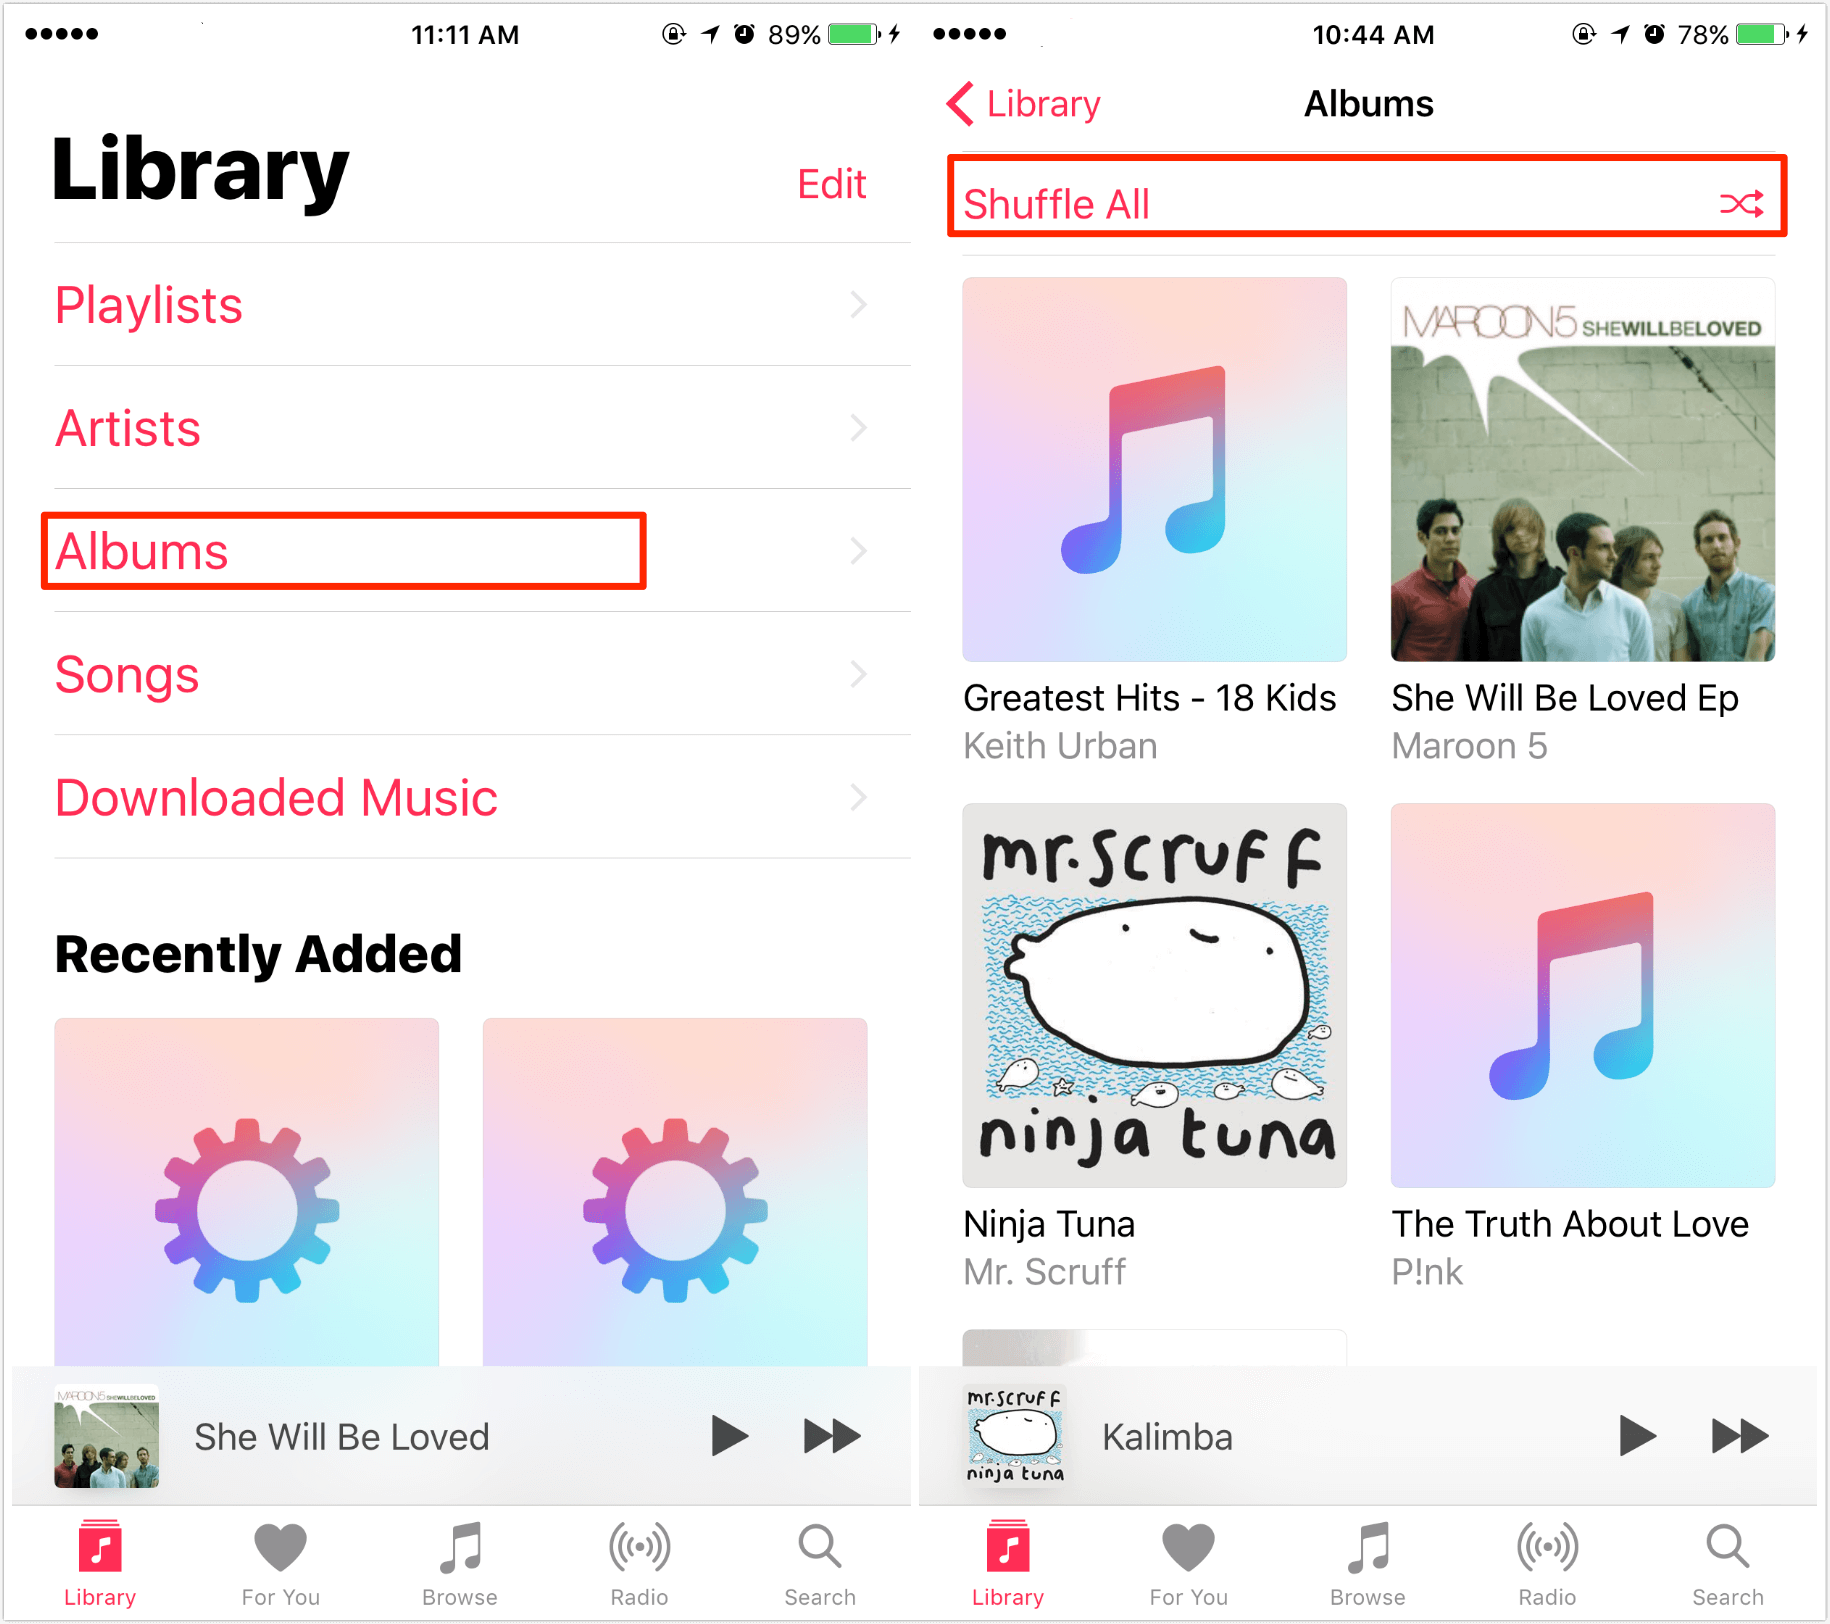 How to Shuffle All Songs from Albums View in iOS 10